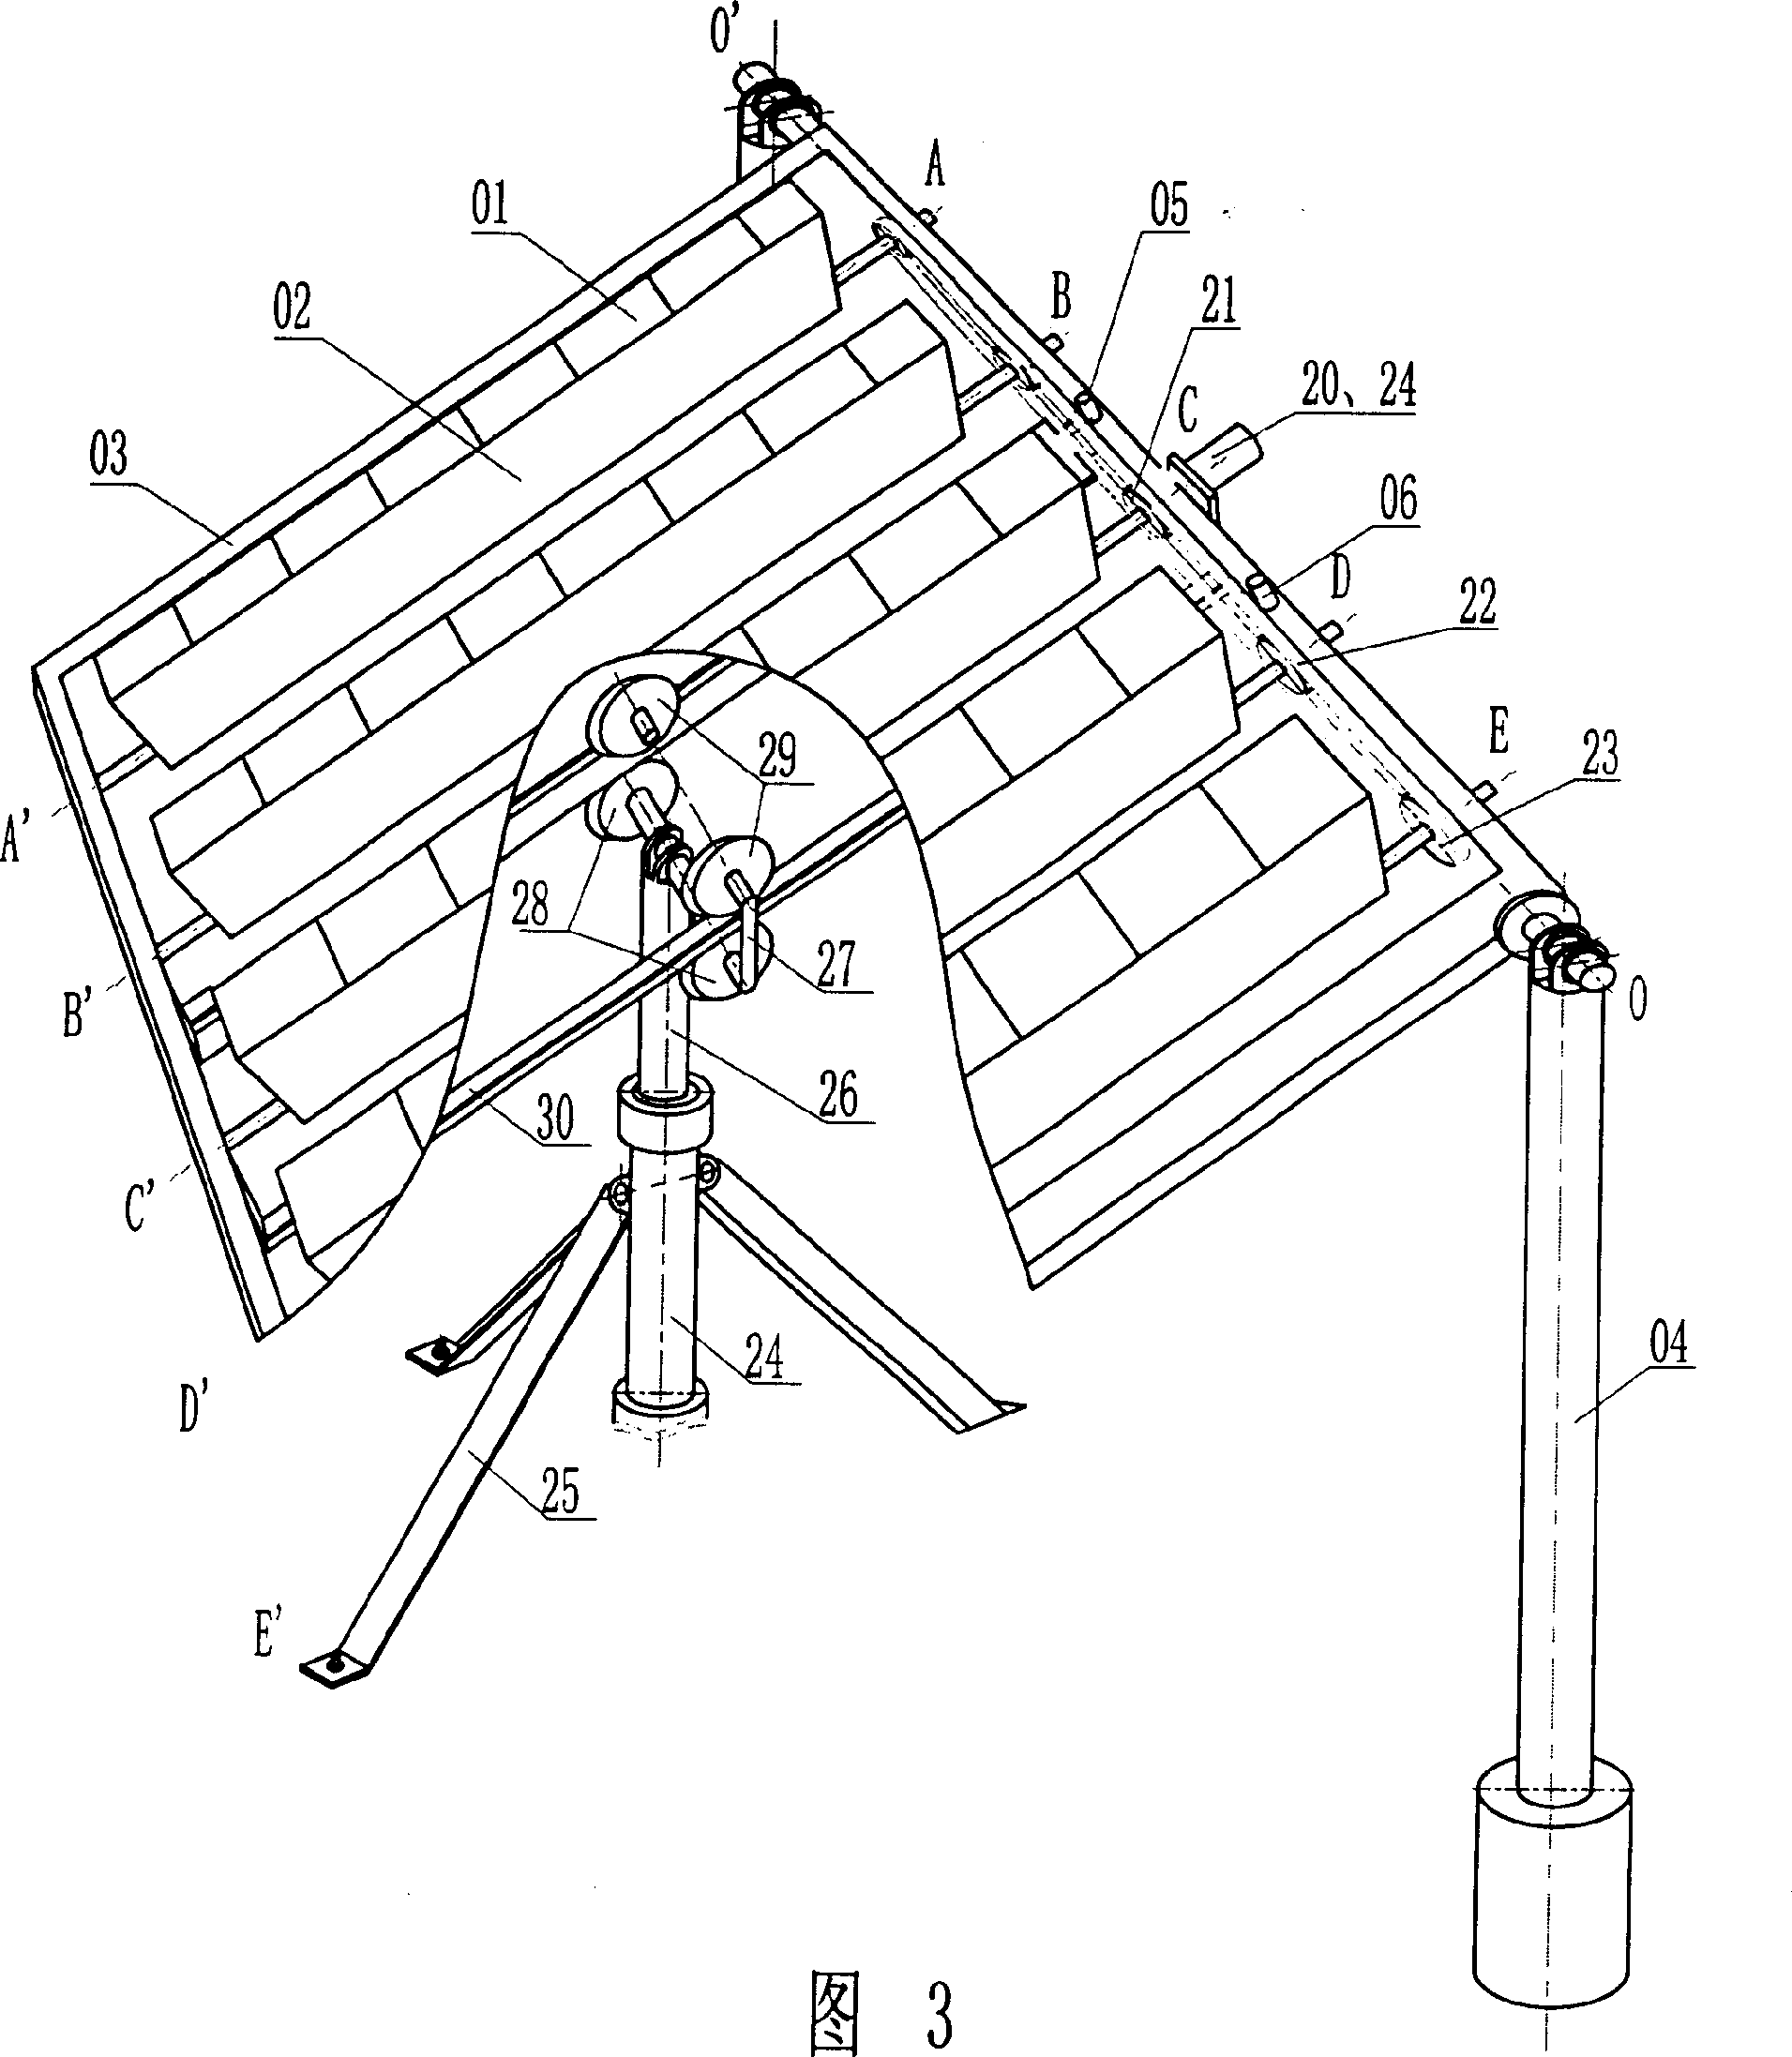 Large type wind proof light collecting device with capability of automatic tracking sun